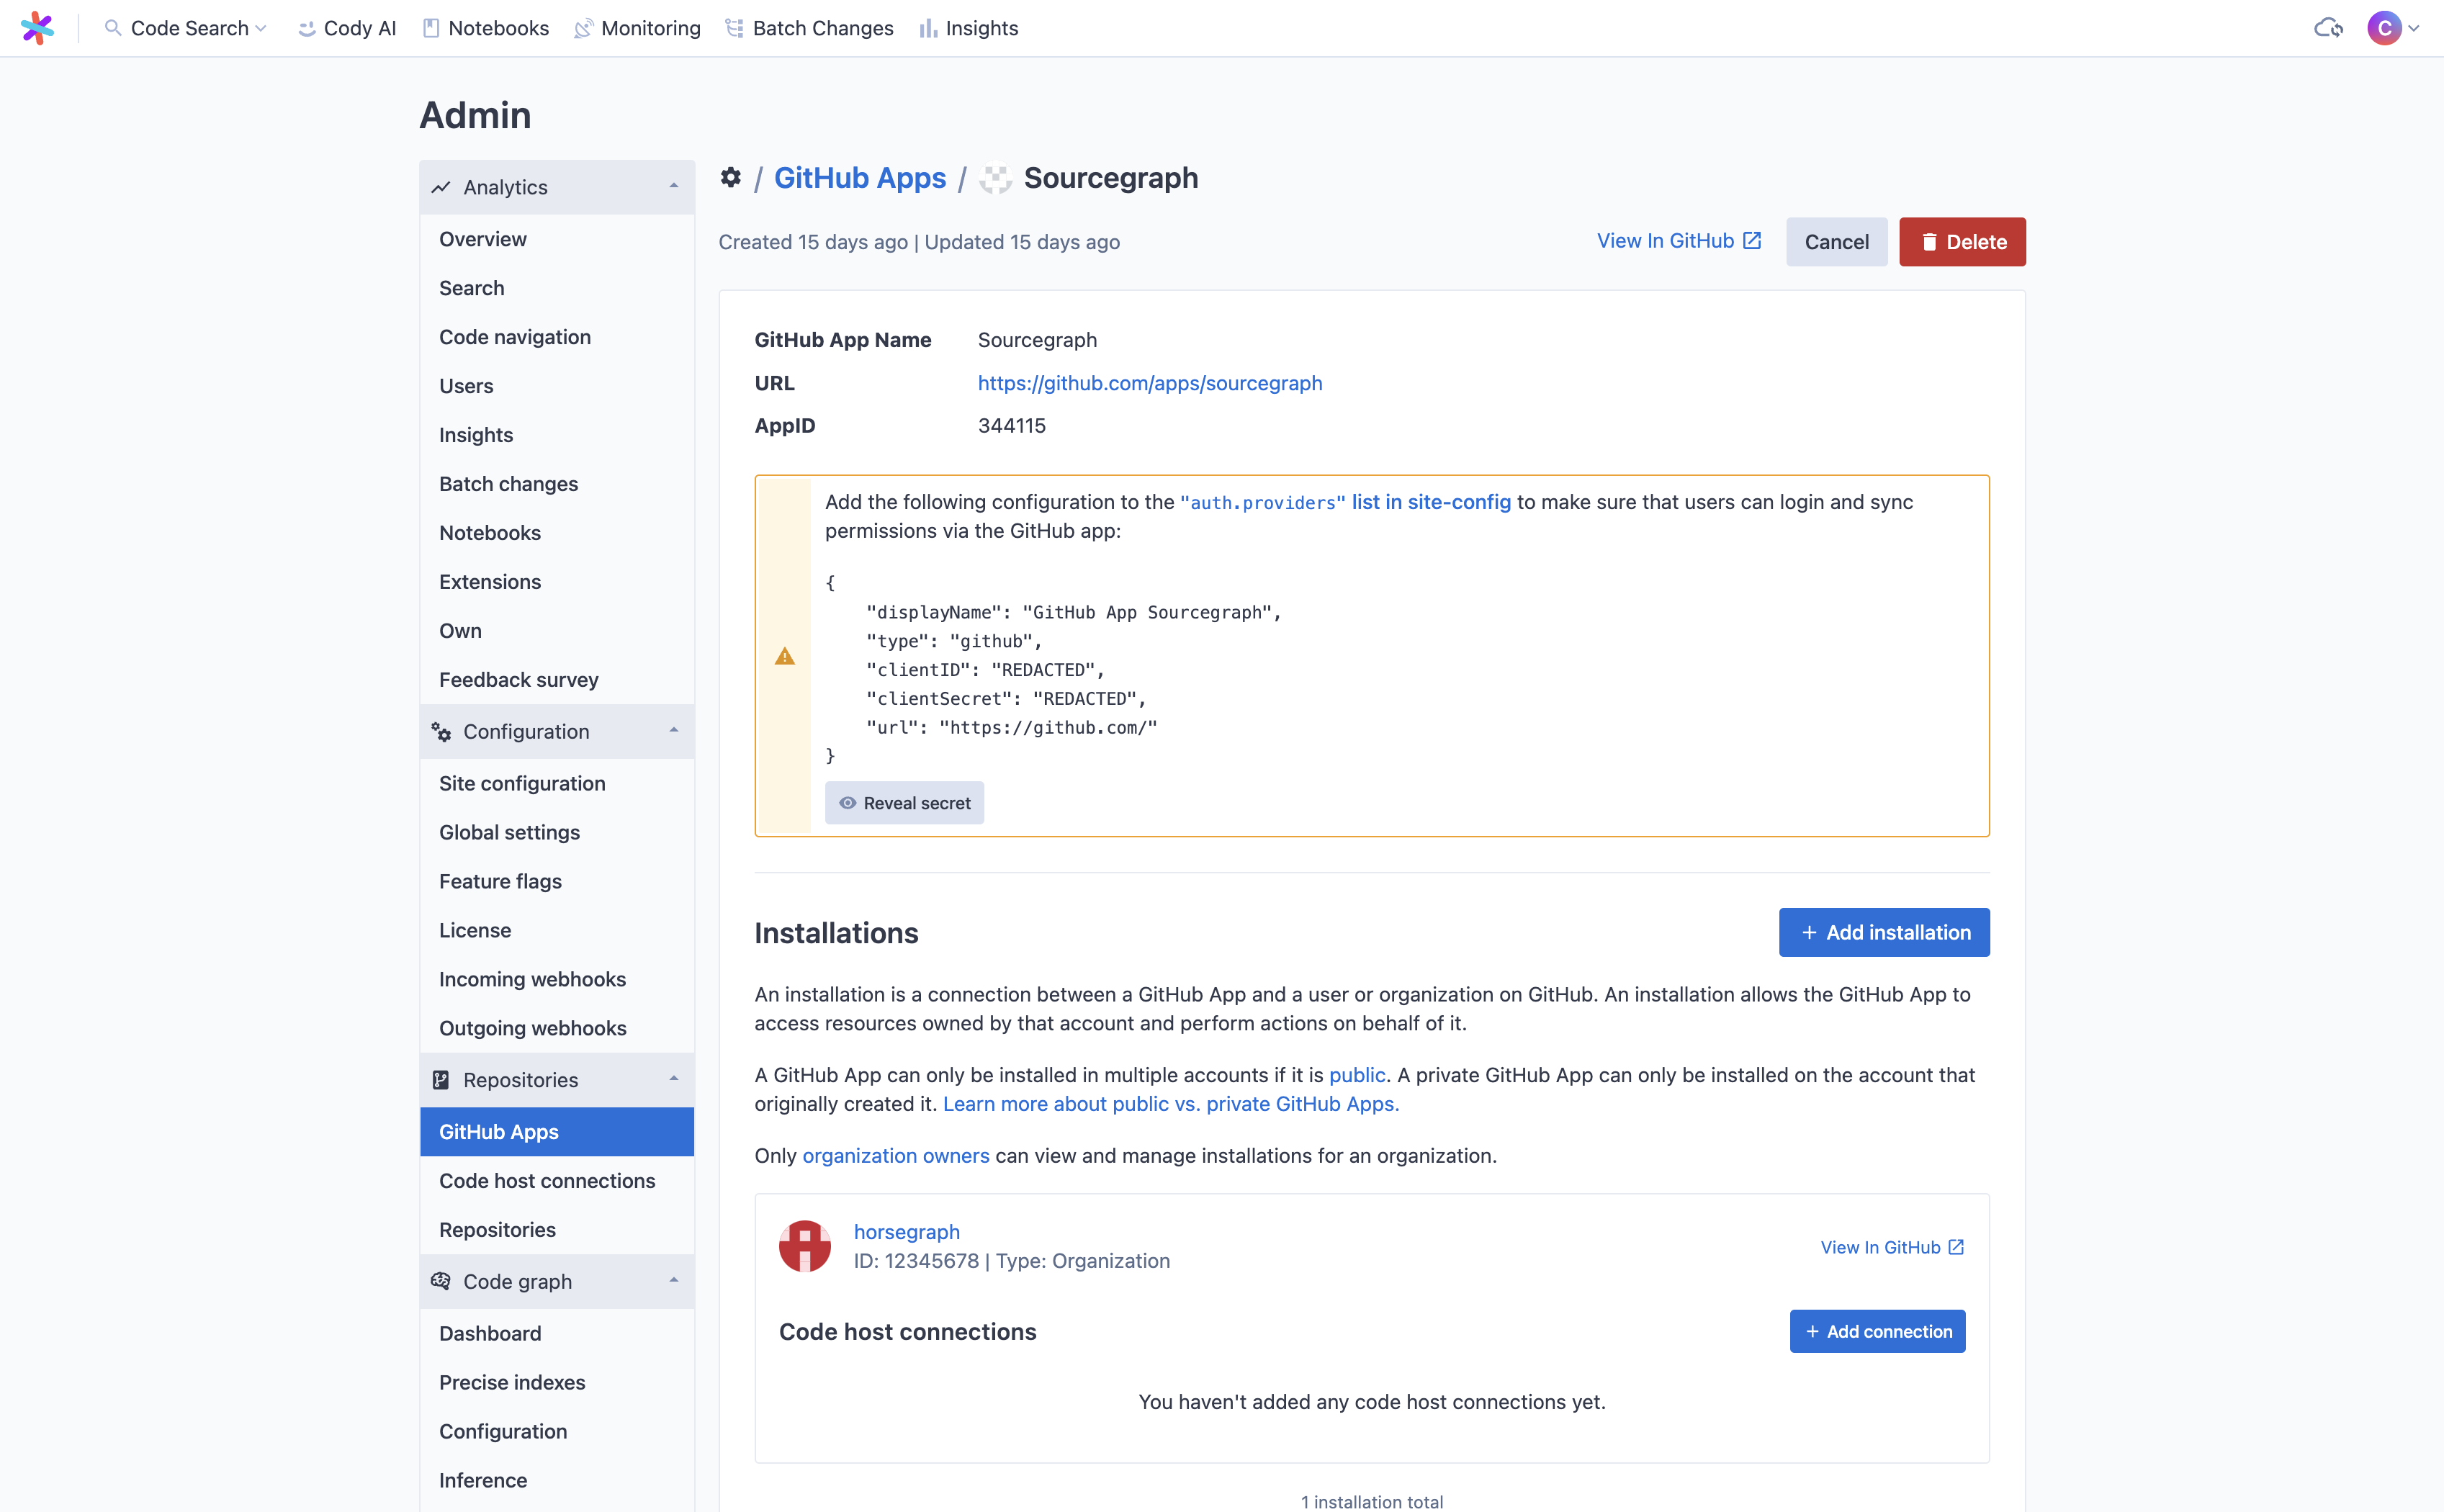 The GitHub App details page on Sourcegraph